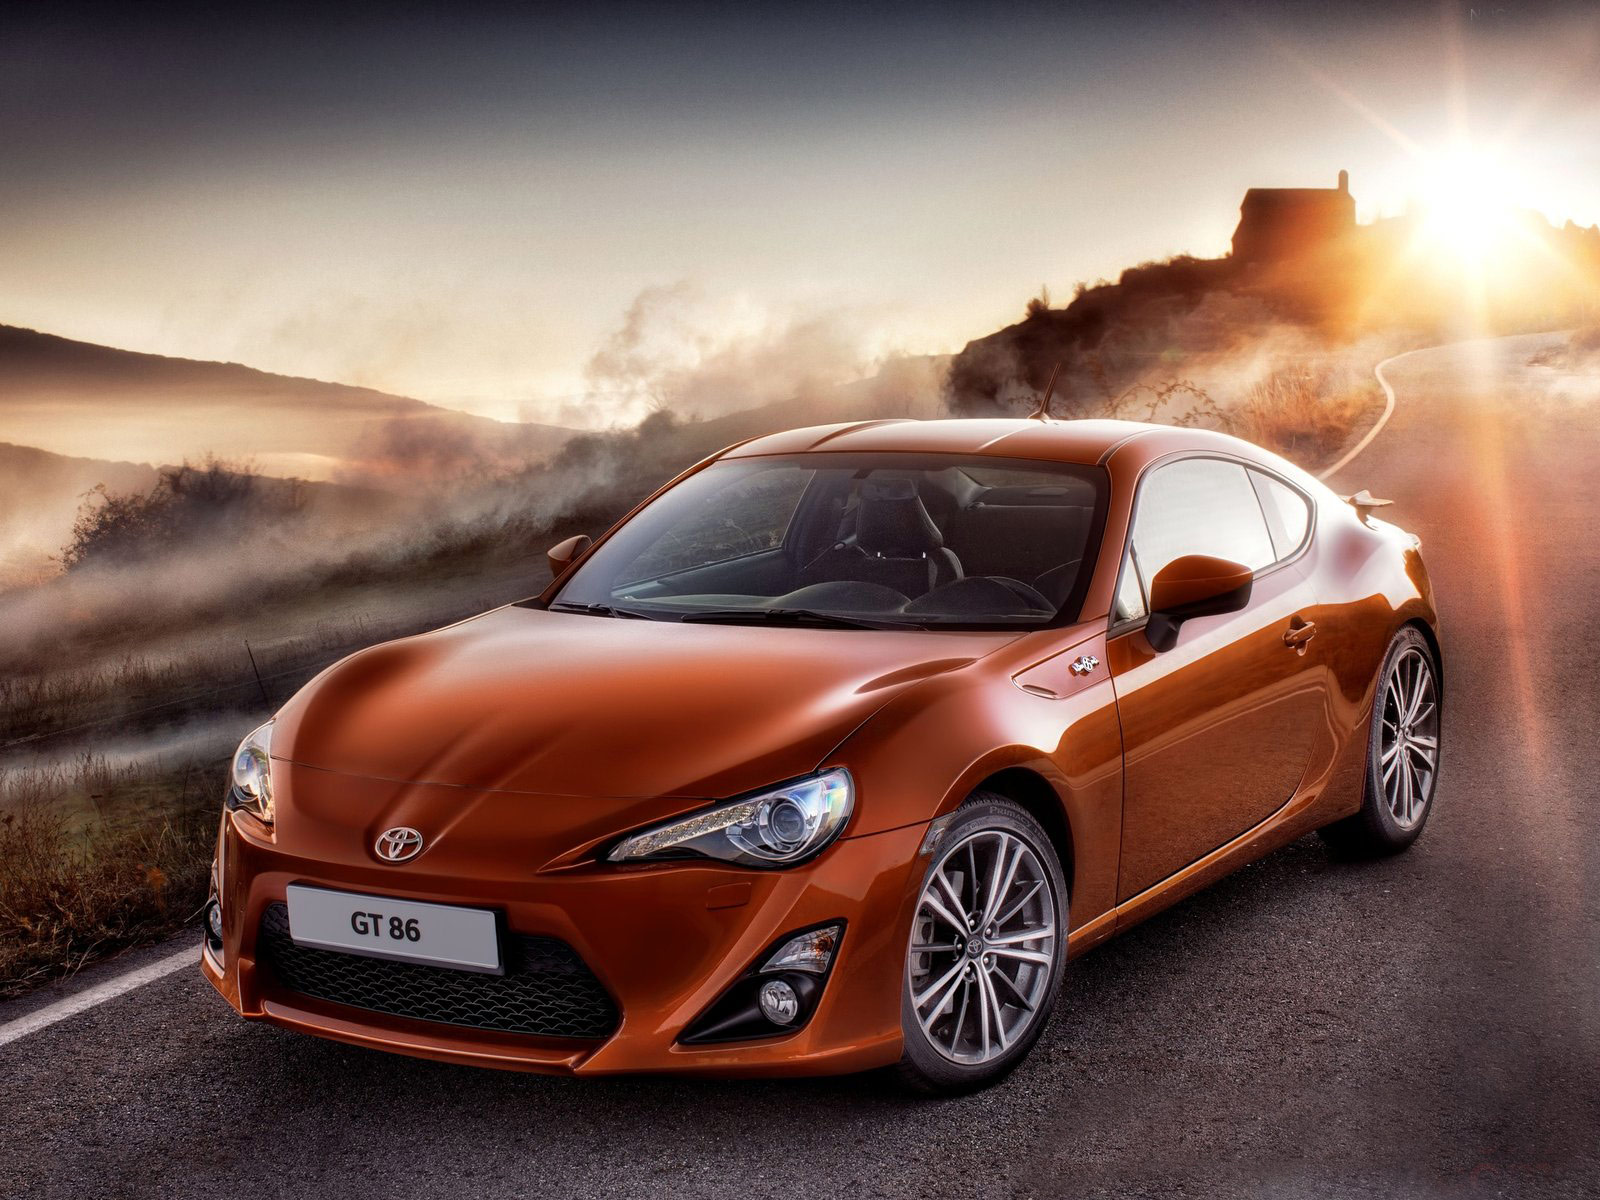 Free download 2013 TOYOTA GT 86 car picture review [1600x1200] for your Desktop, Mobile & Tablet. Explore Toyota Cars Wallpaper. Toyota Cars Wallpaper, Toyota Wallpaper, Toyota Tacoma Wallpaper